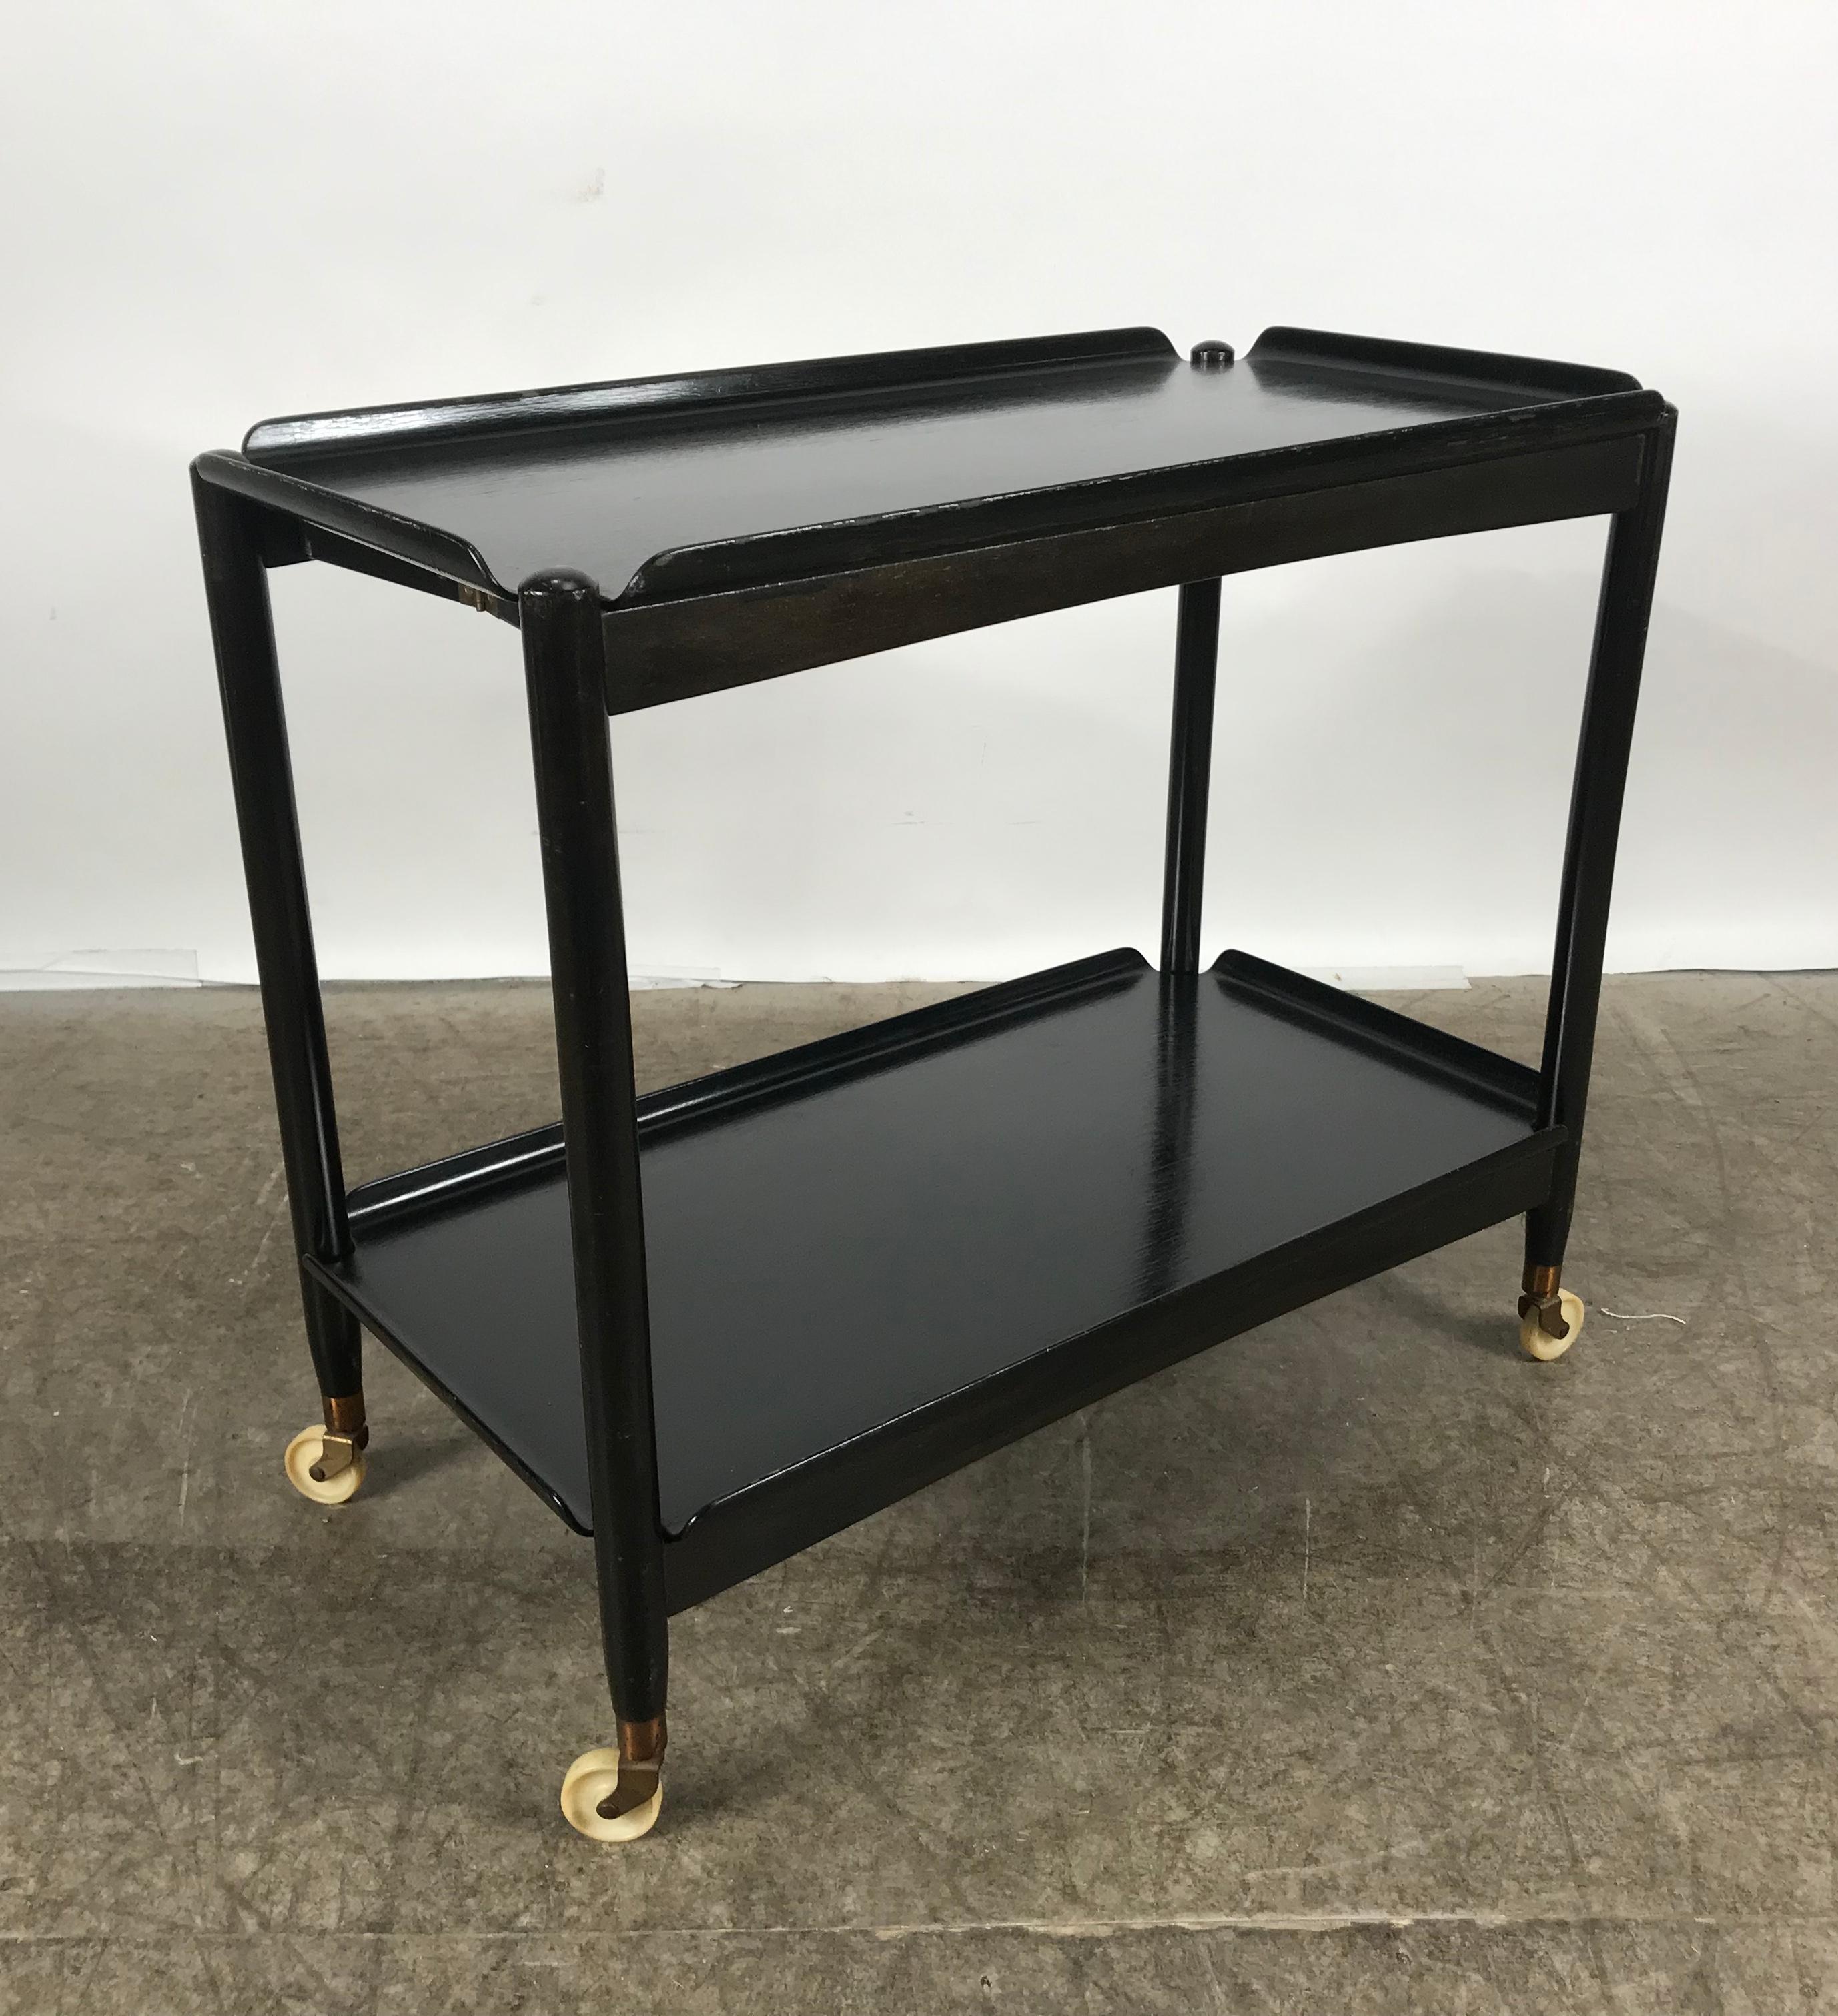 Classic Danish Modernist Two-Tier Collapsible Rolling Tray Table / Serving Cart (Lackiert)